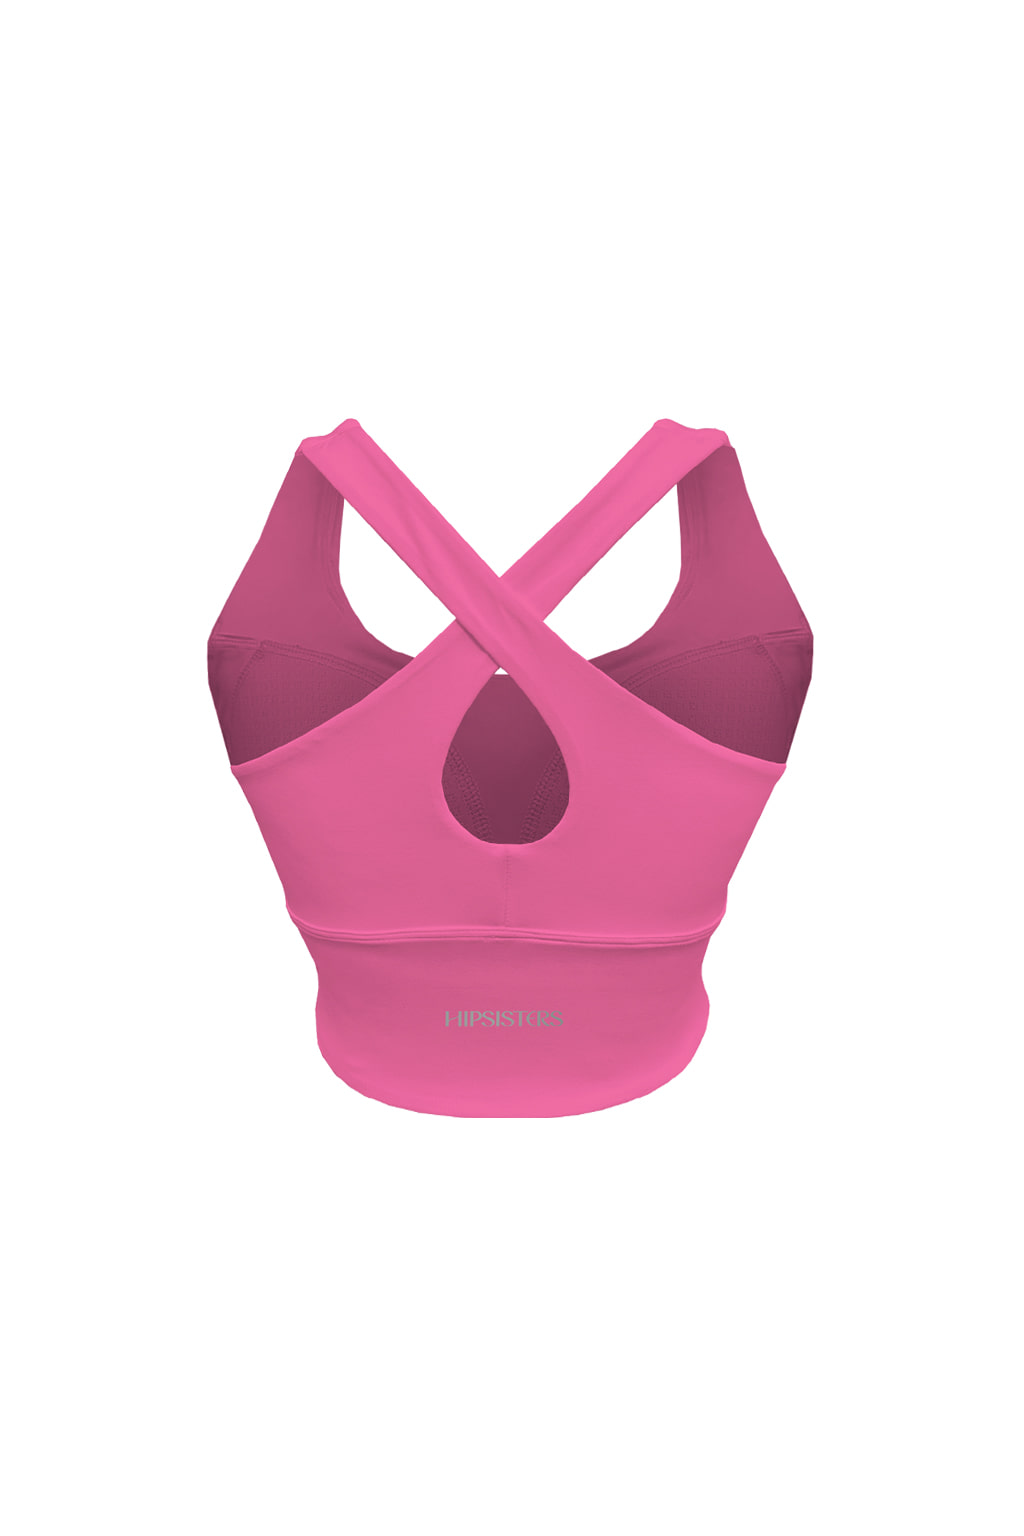 All-in-one support bra top tone-up pink